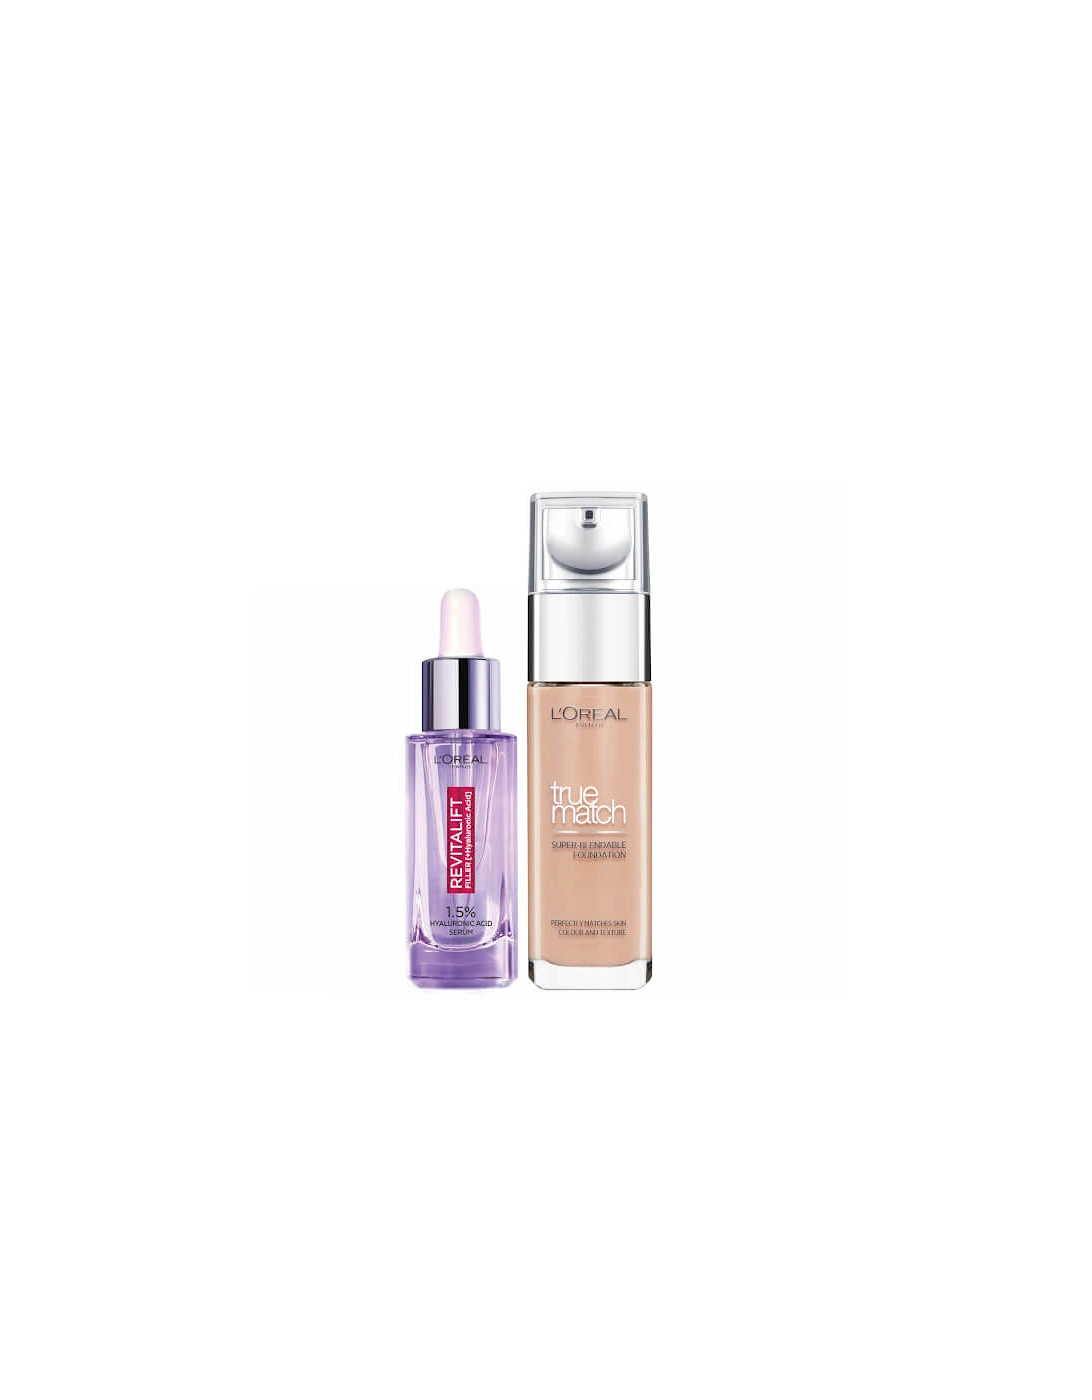 L’Oreal Paris Hyaluronic Acid Filler Serum and True Match Hyaluronic Acid Foundation Duo - 6N Honey, 2 of 1